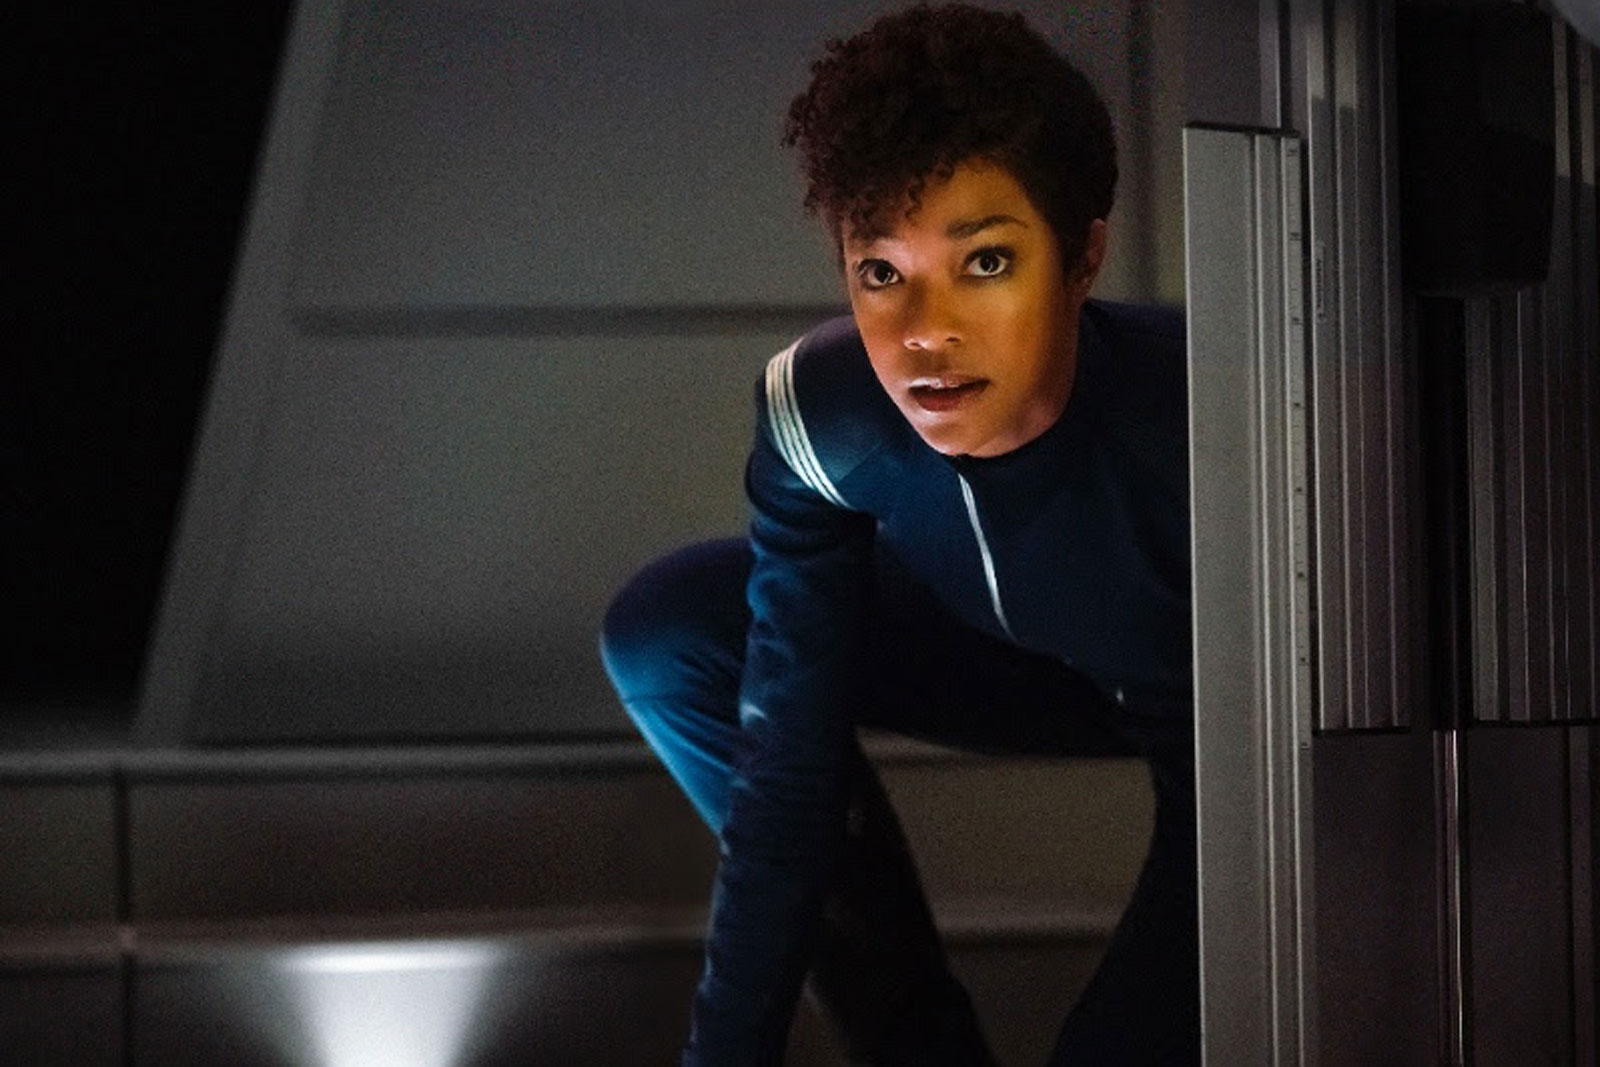 photo of Latest 'Star Trek: Discovery' trailer shows more of the crew image